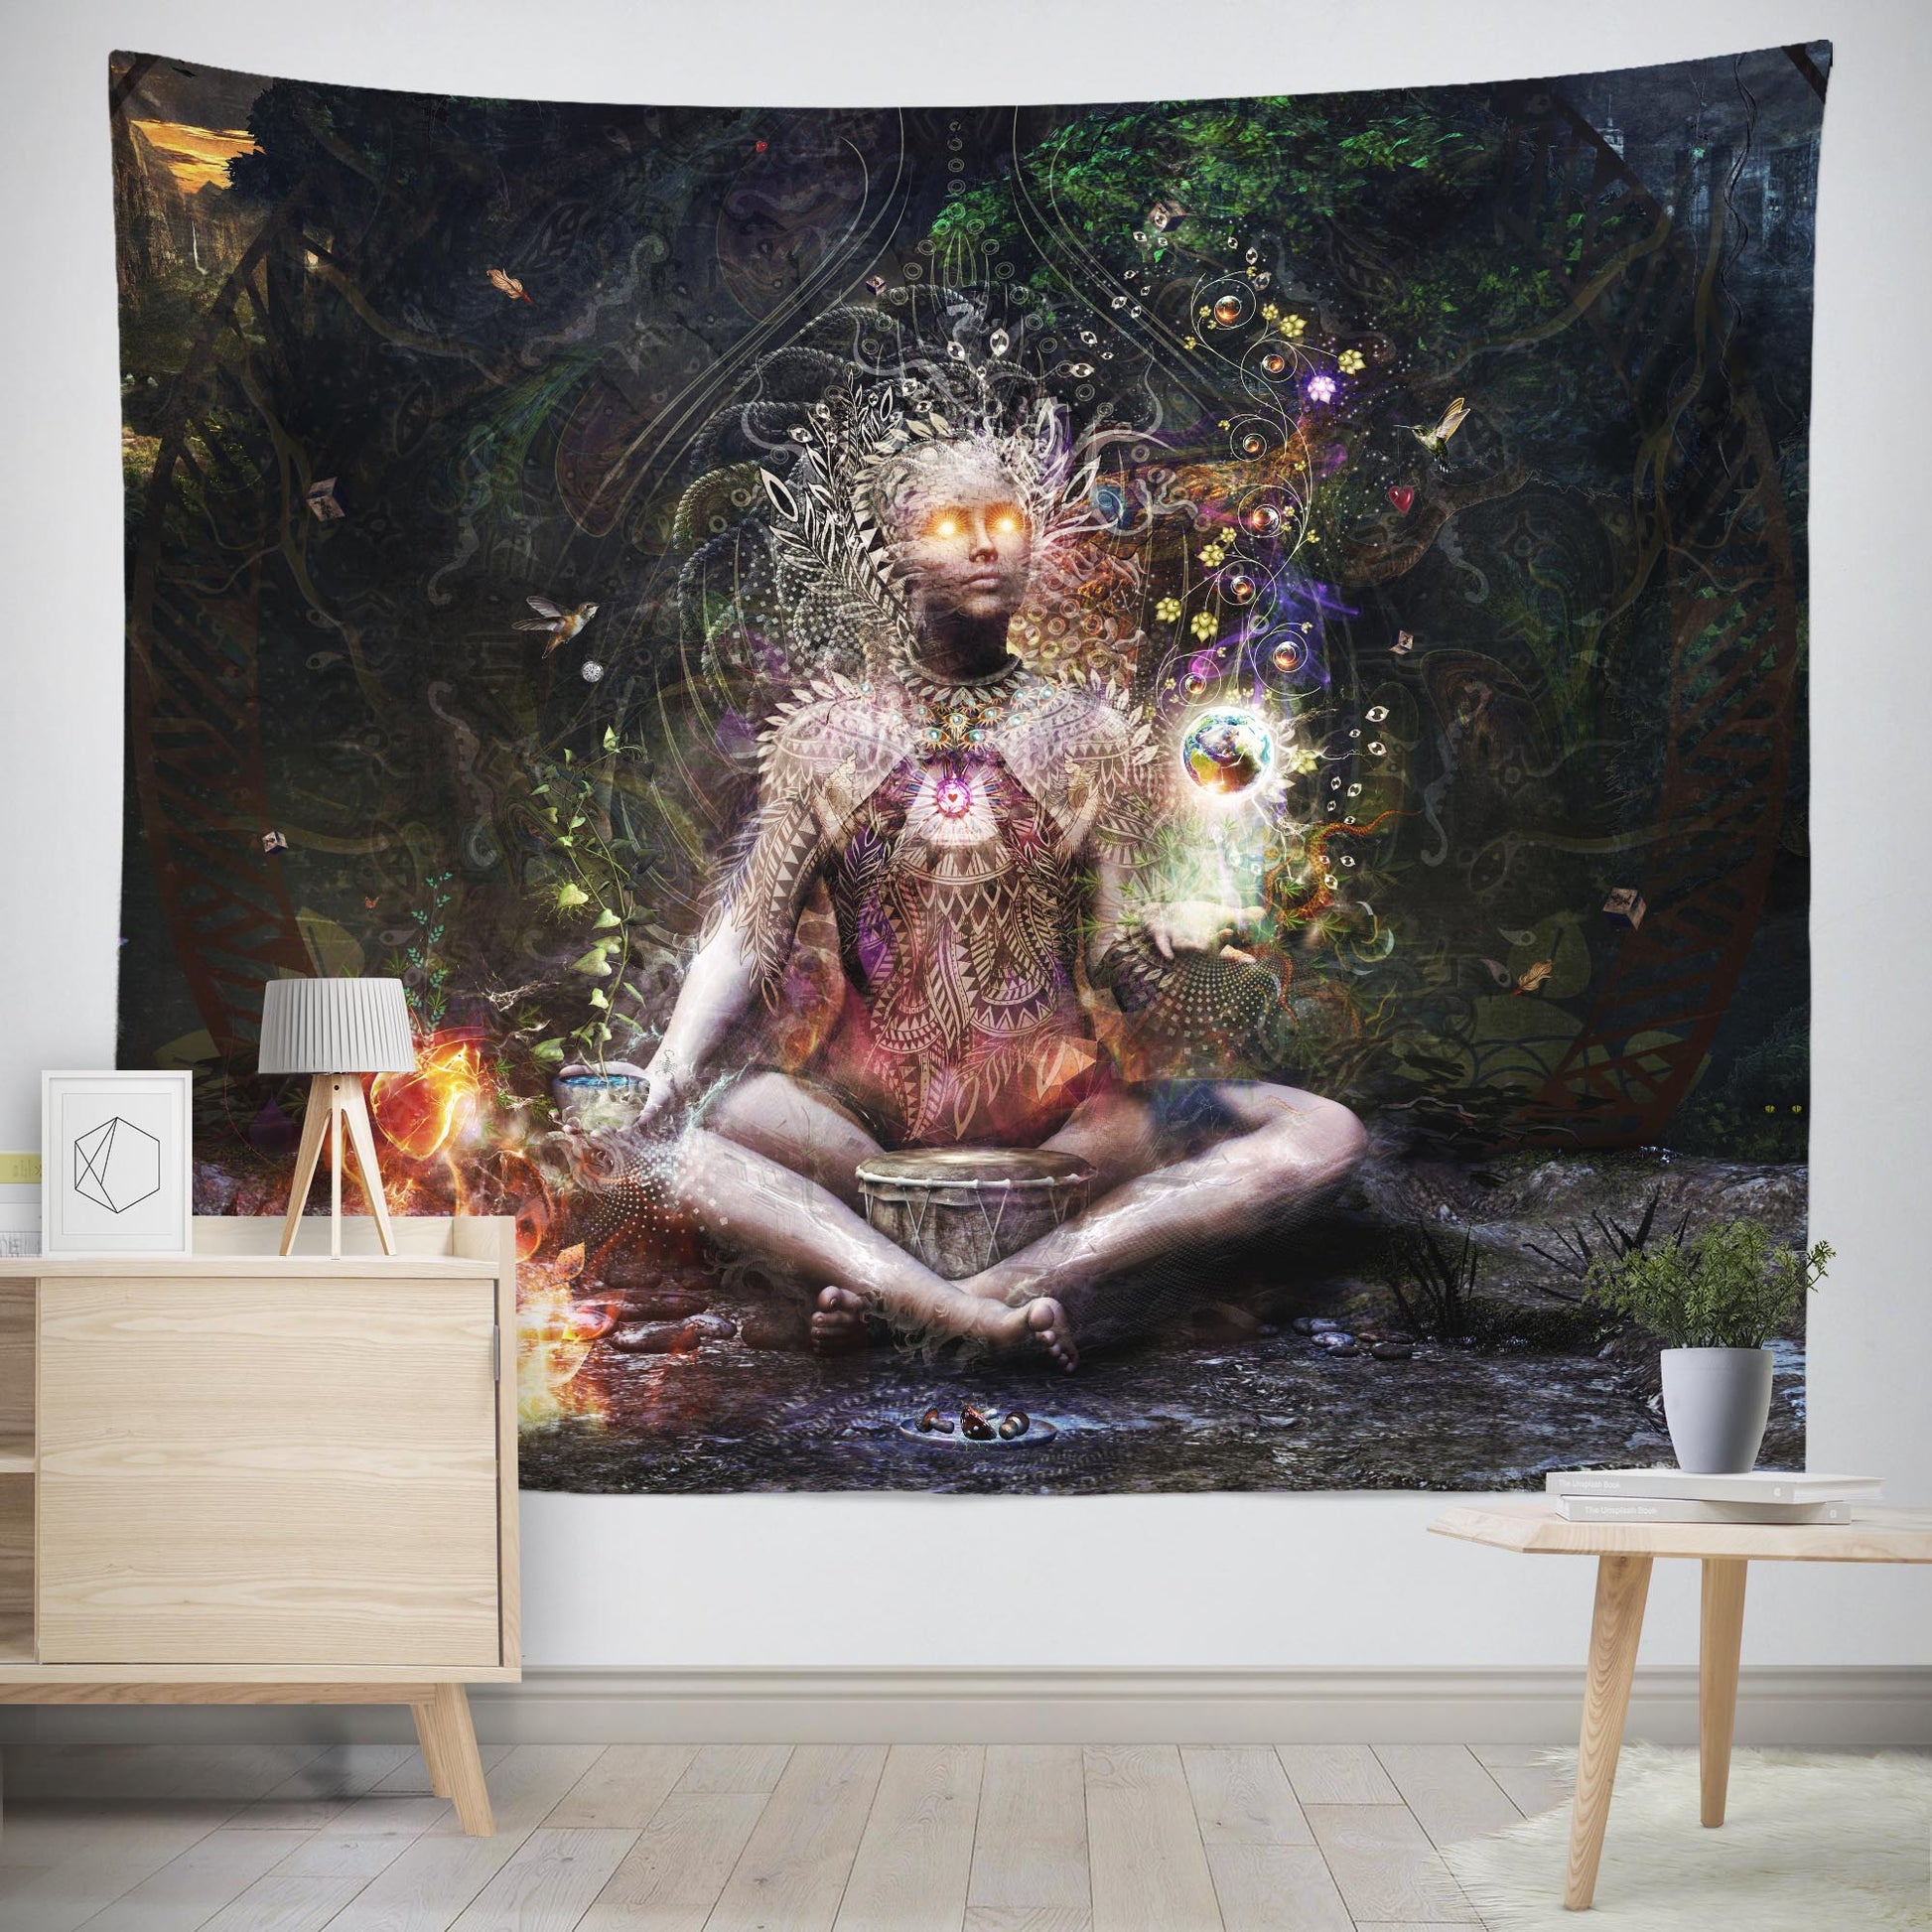 Extra large trippy wall tapestries by Cameron Gray